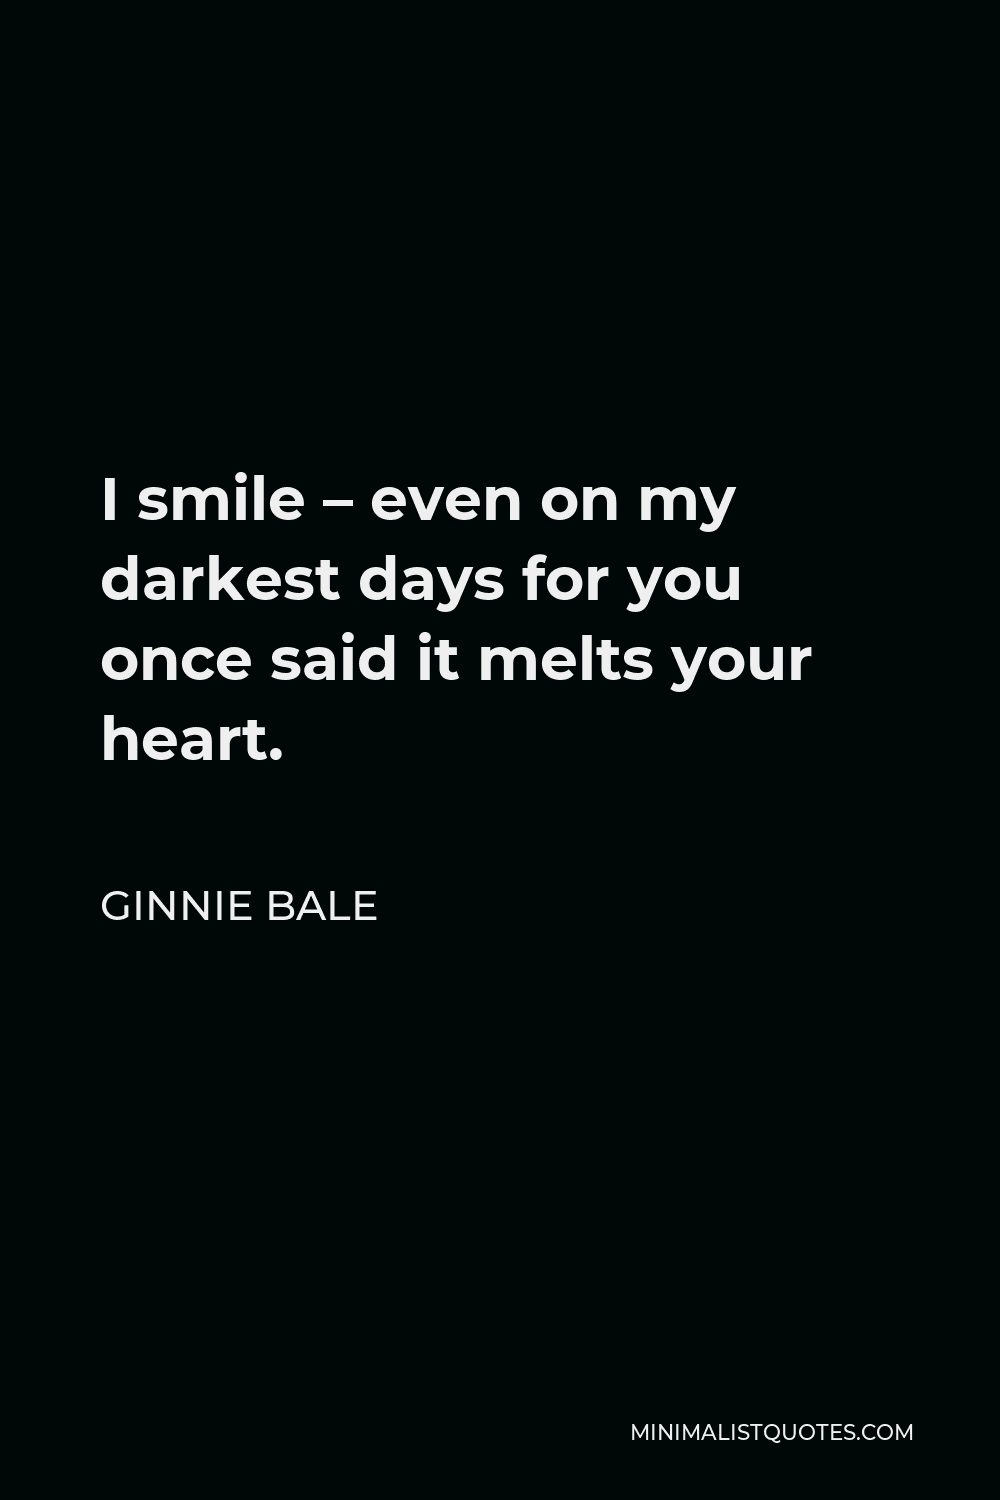 Ginnie Bale Quote - I smile – even on my darkest days for you once said it melts your heart.